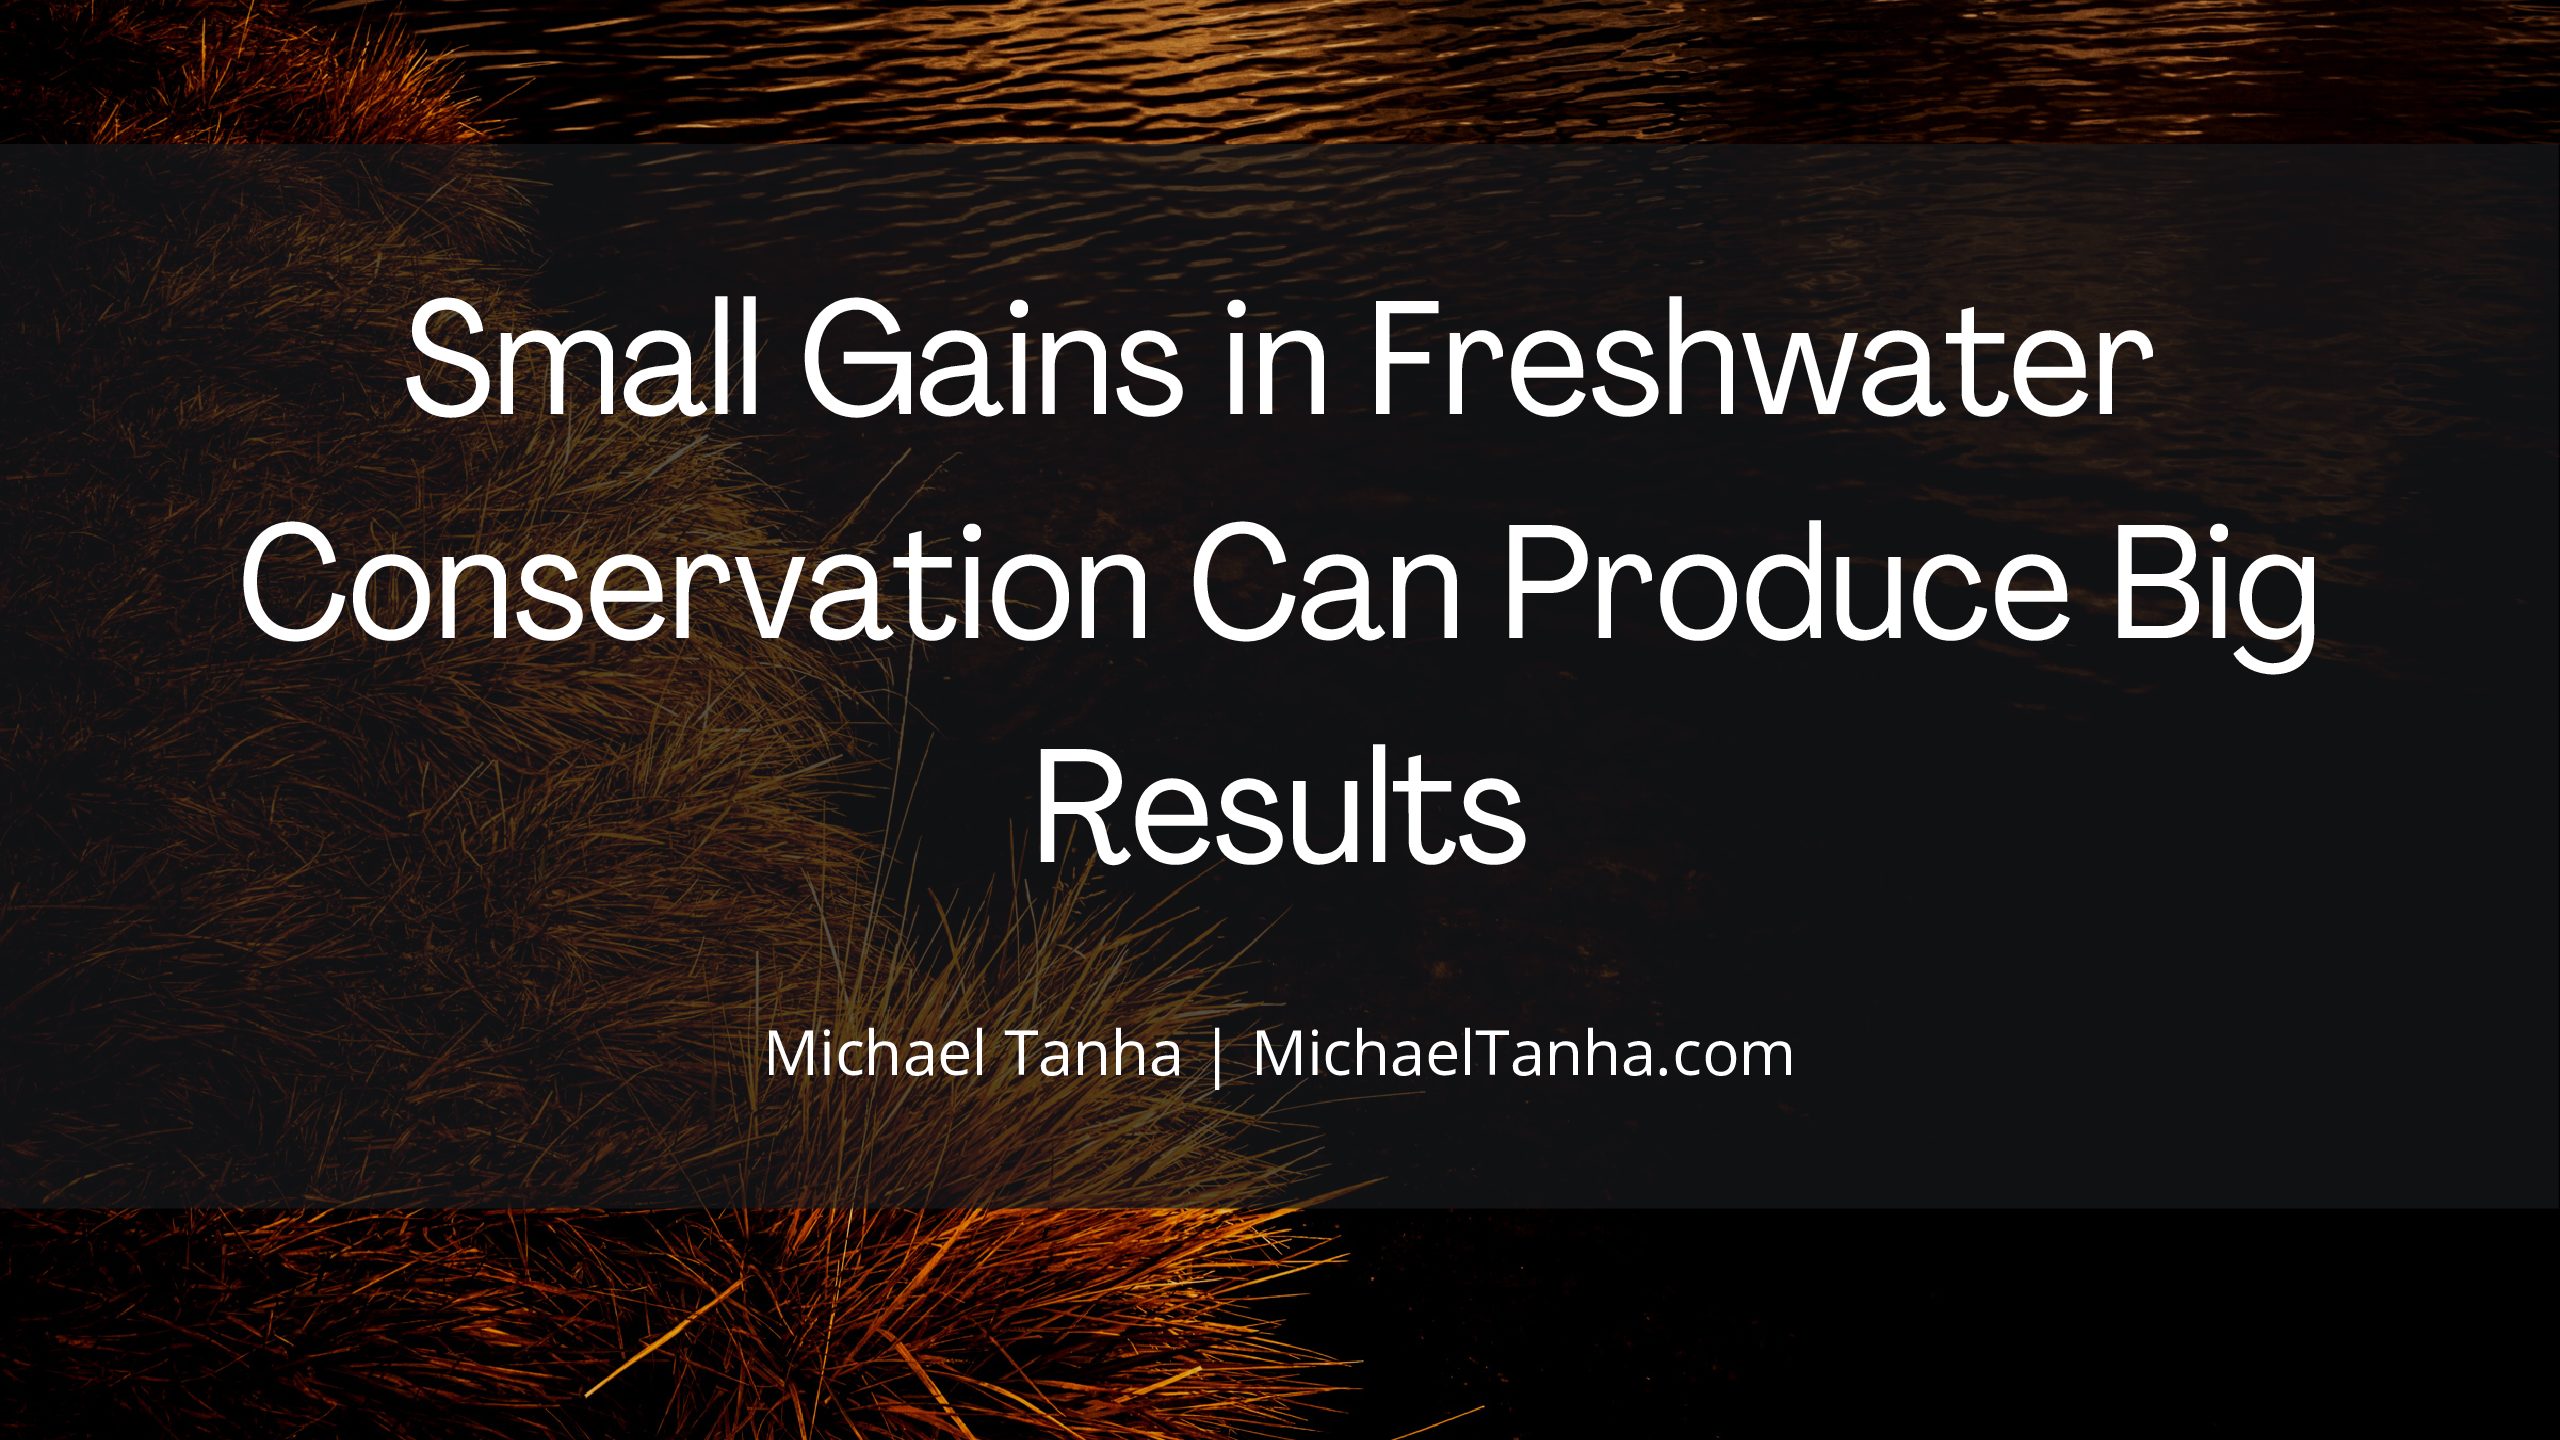 Small Gains in Freshwater Conservation Can Produce Big Results